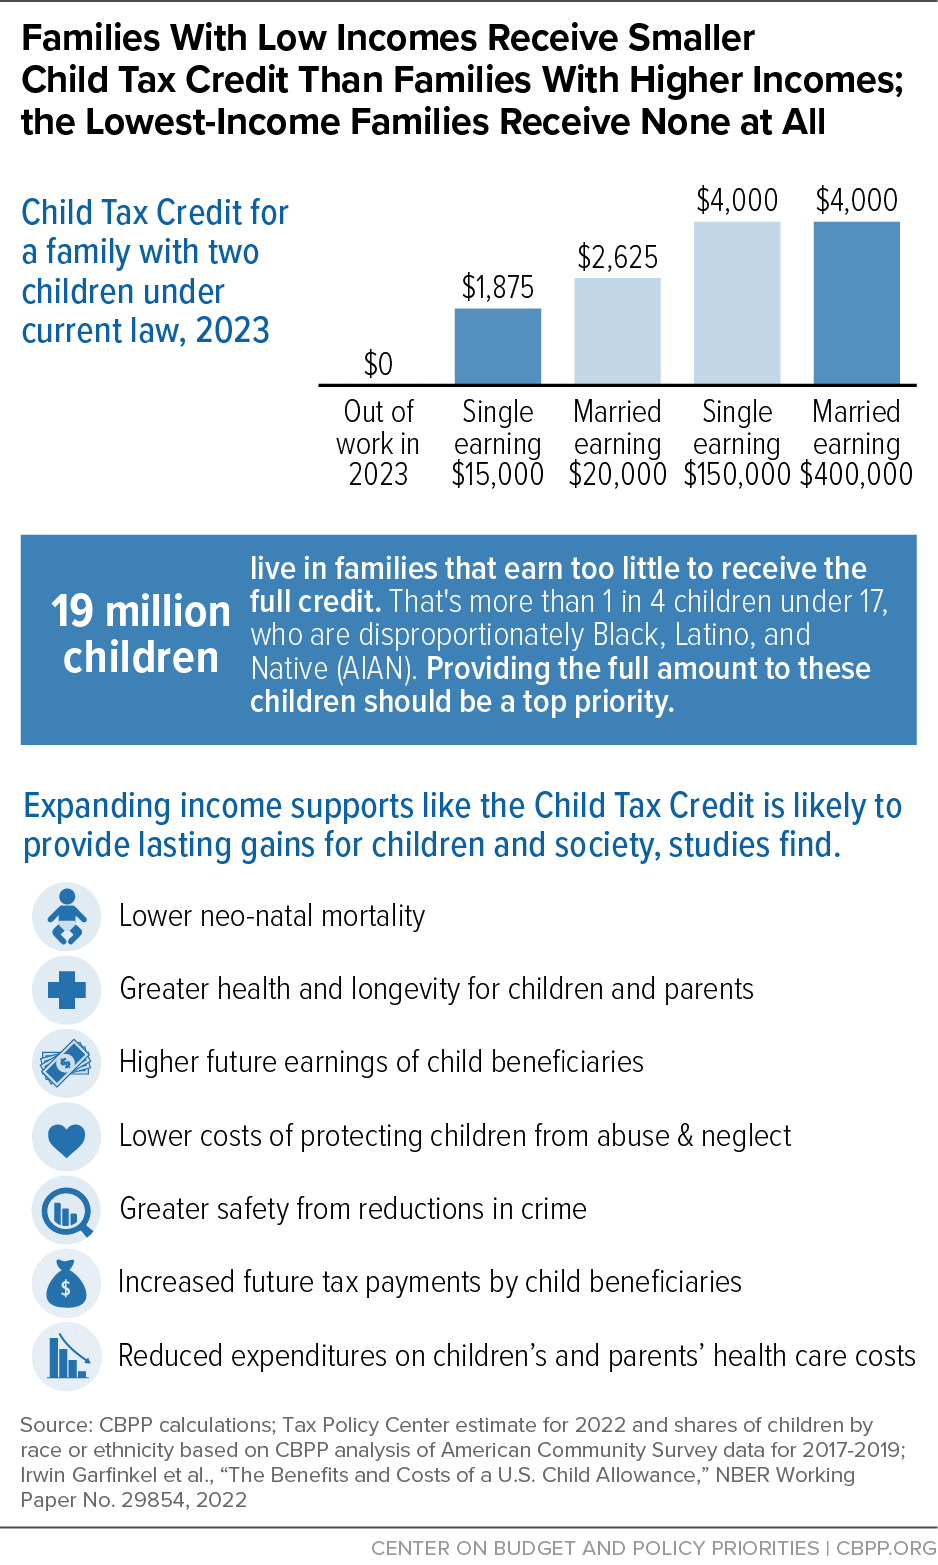 Families With Low Incomes Receive Smaller Child Tax Credit Than Families With Higher Incomes; the Lowest-Income Families Receive None at All